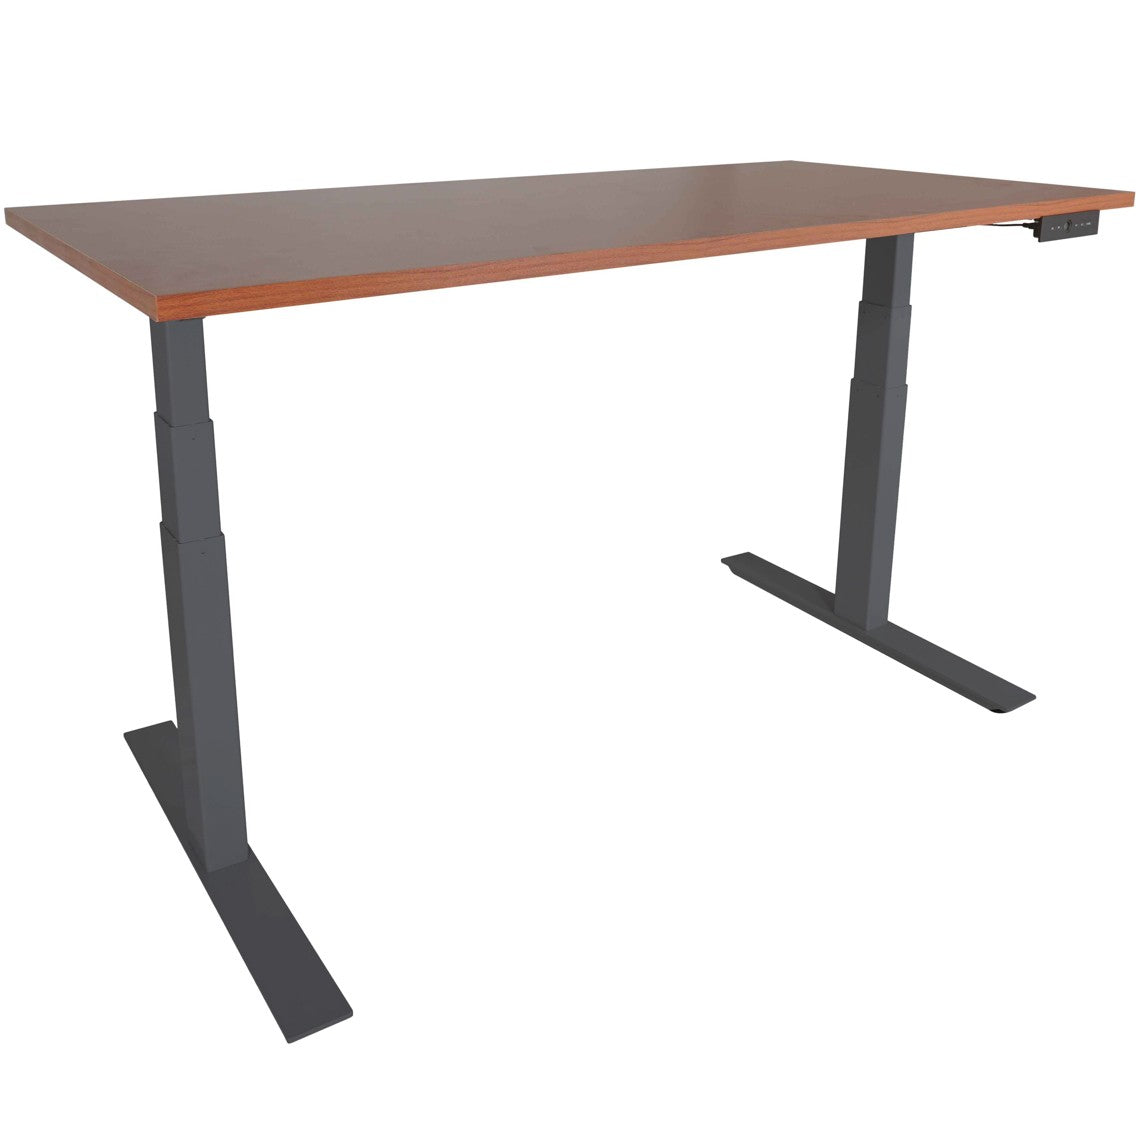 A6 Adjustable Sit To Stand Desk 24"- 50" W/ Wood 60" X 30" Top - view 1